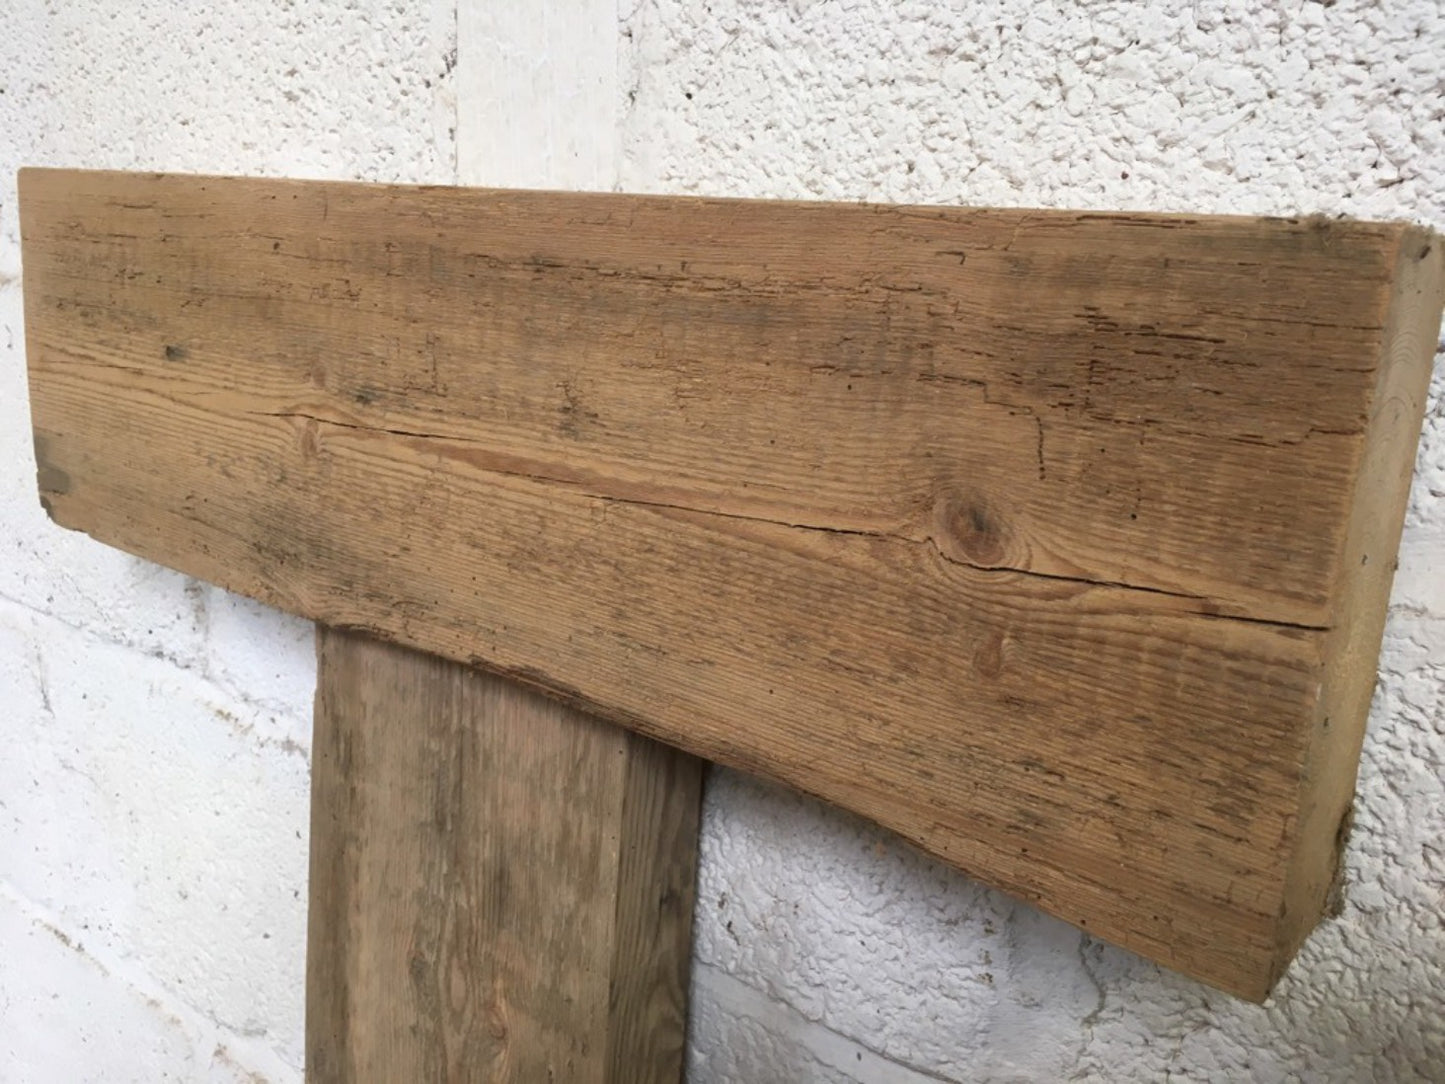 2ft X 6 7/8” X 2 7/8” Length Reclaimed Old Rustic Pine Mantel Shelf Wormy